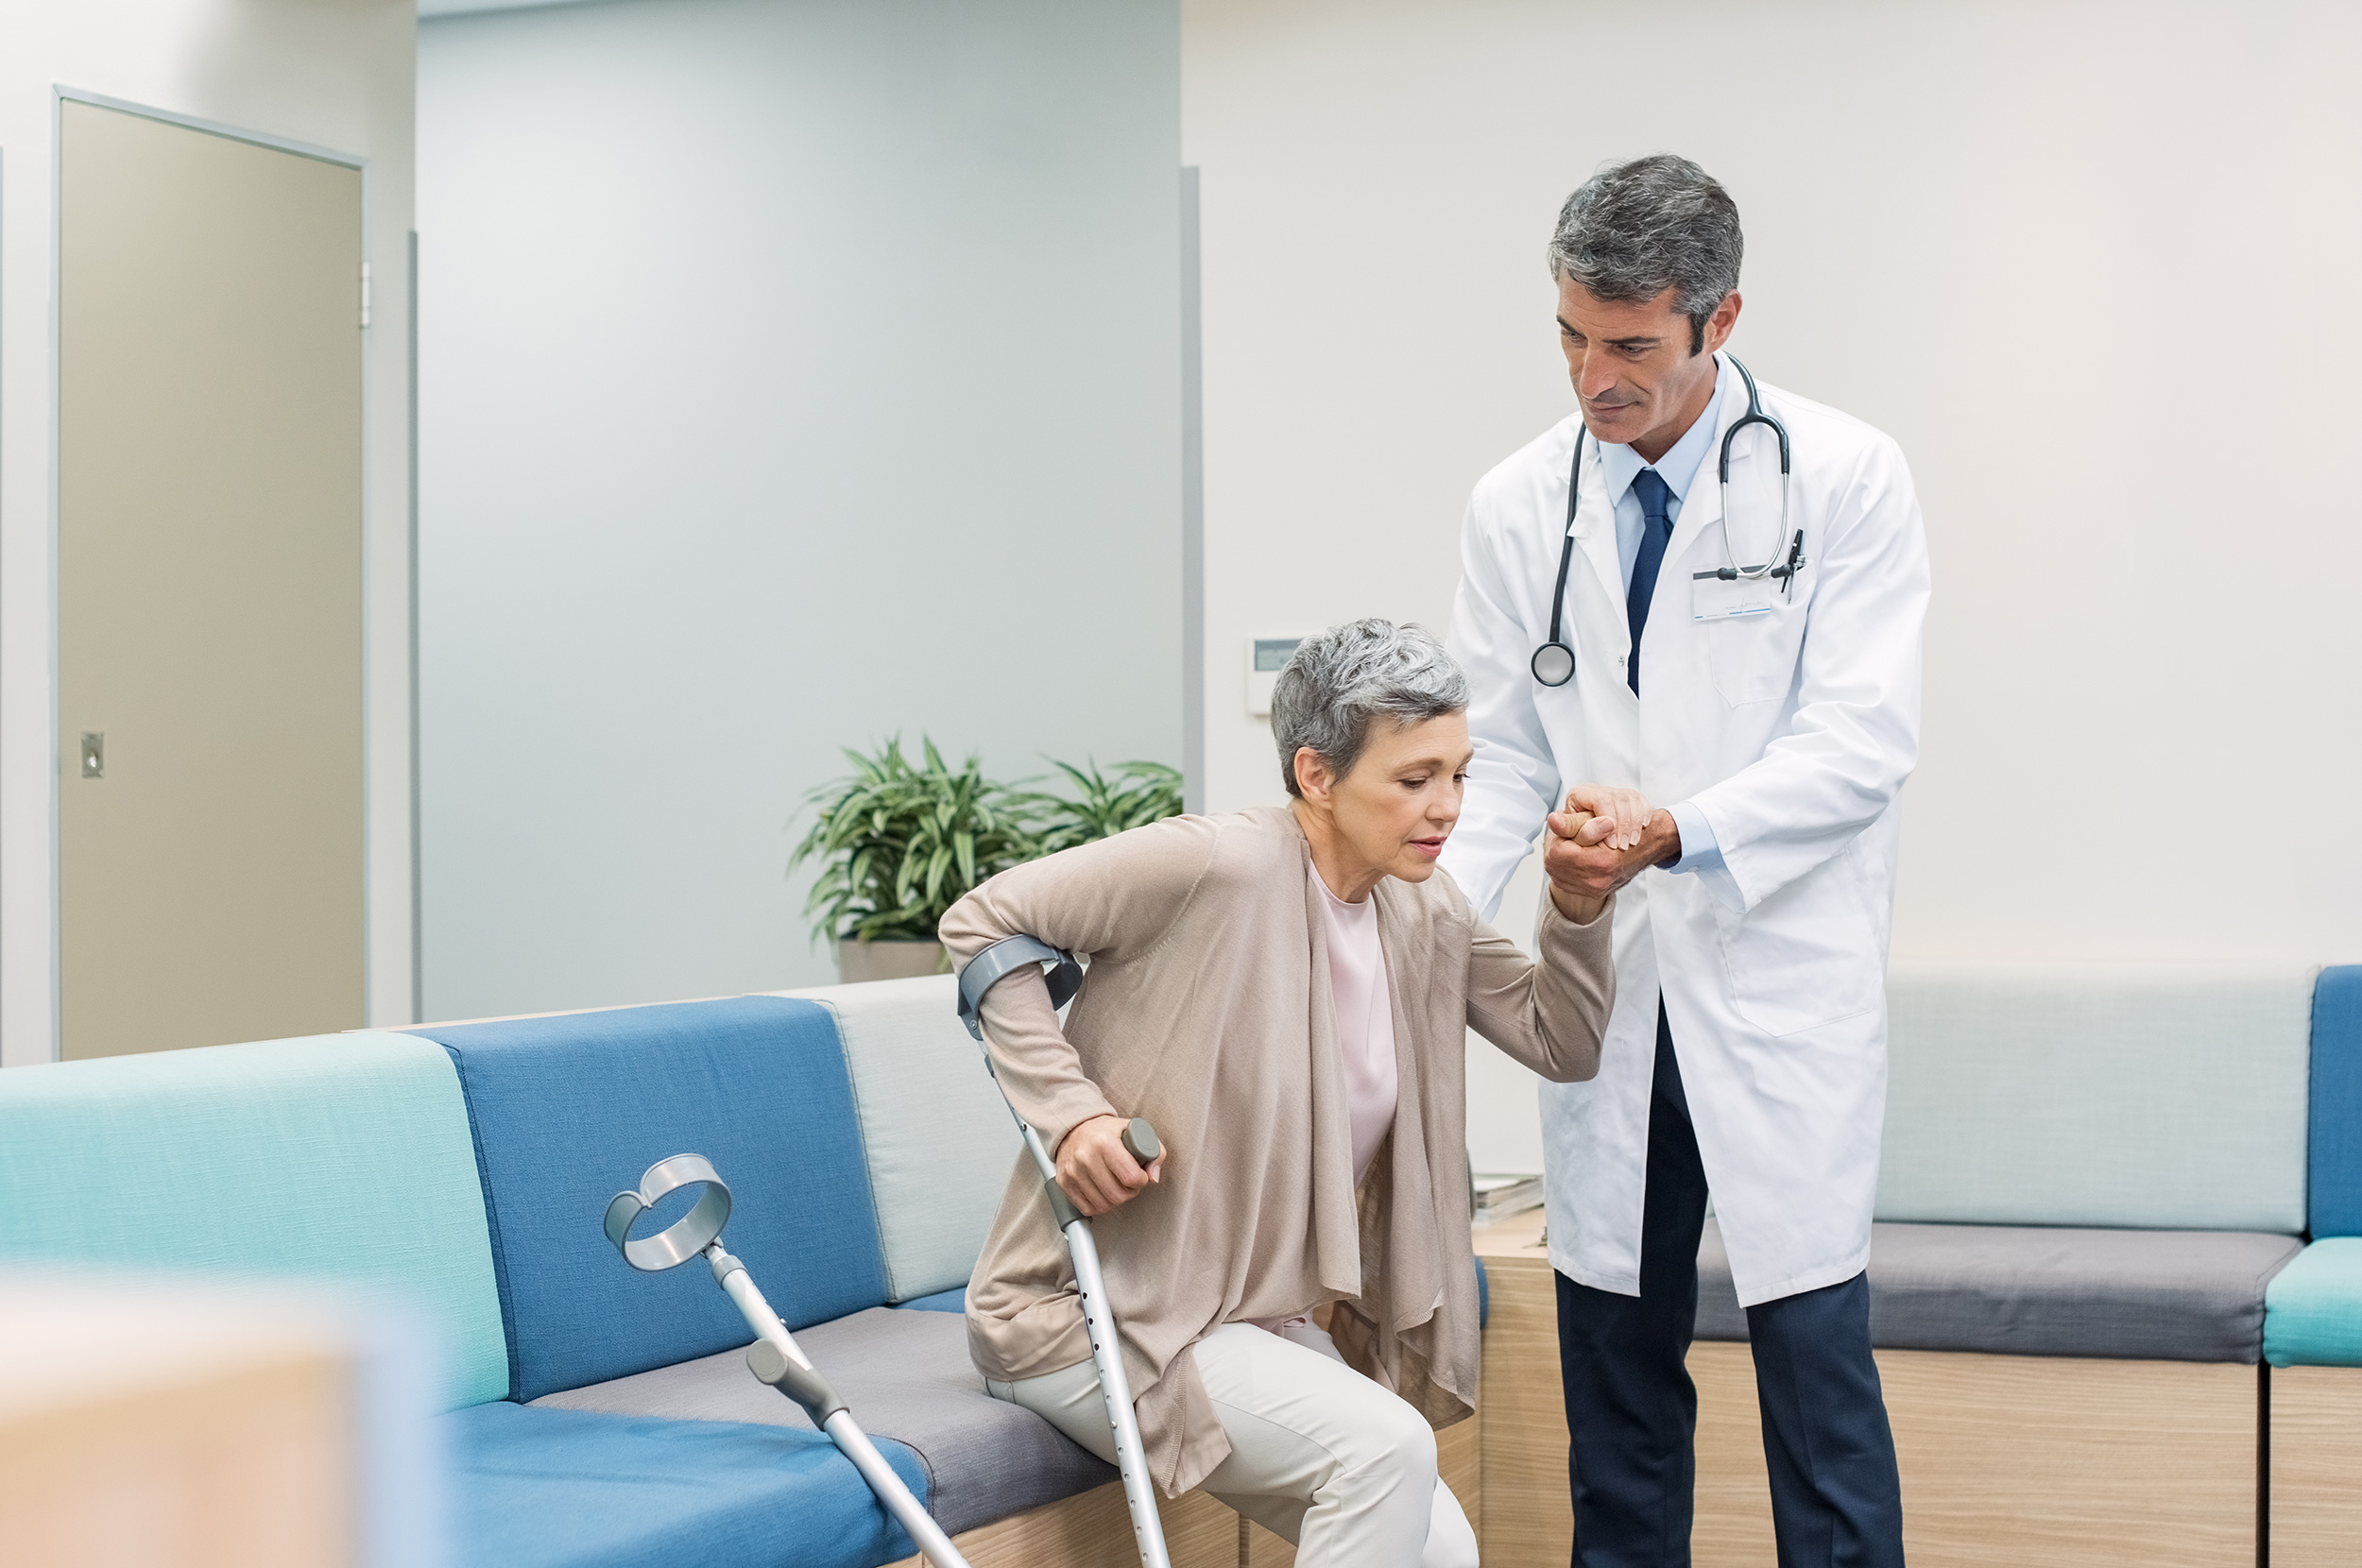 A doctor with a medical coat and stethoscope helps a woman with crutches get up from a seat in a waiting room. Many impairments qualify for Social Security Disability.